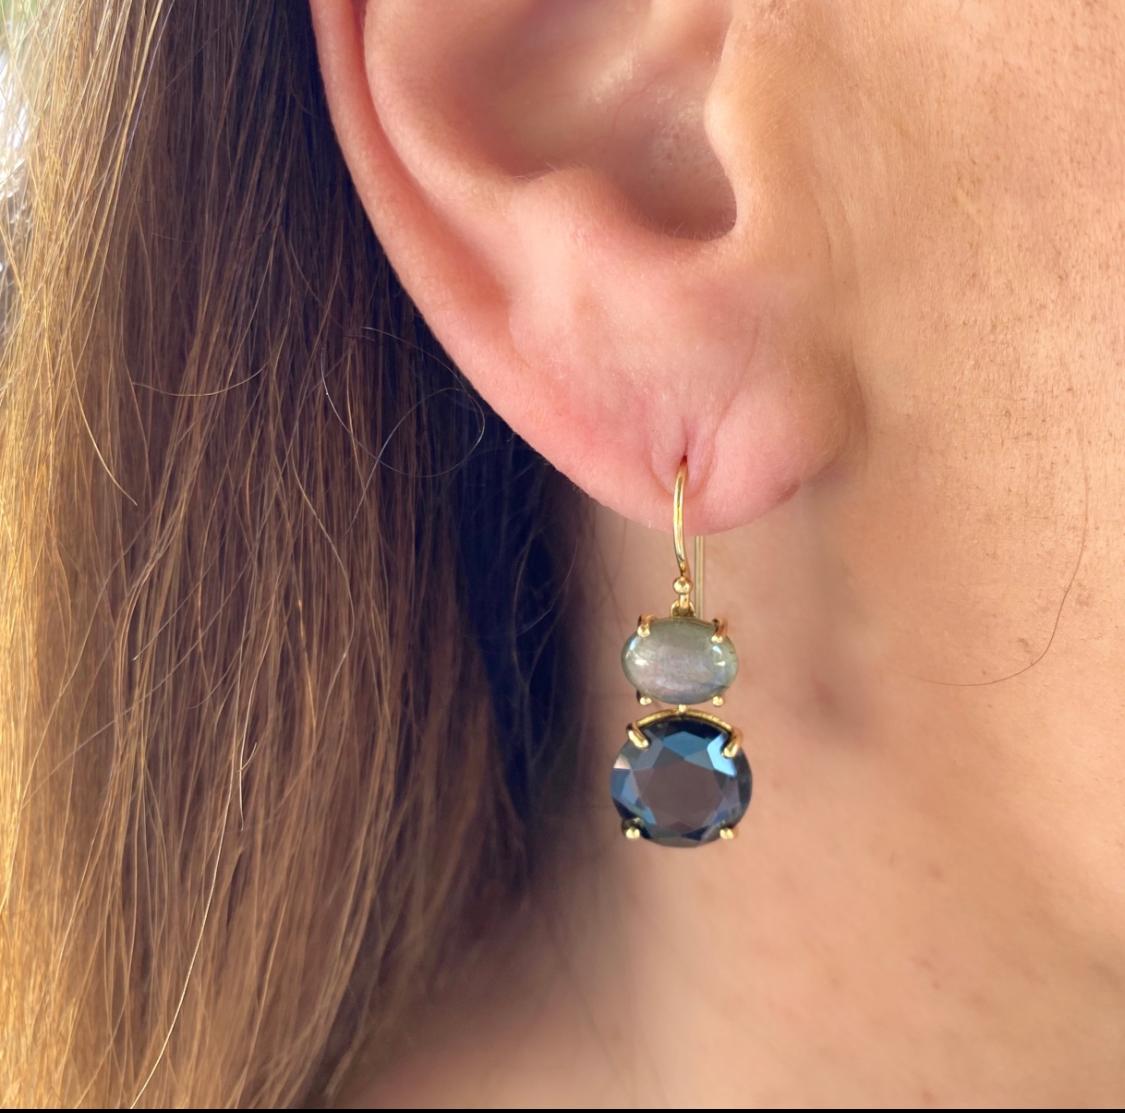 From the Rock Candy Collection, these 18k yellow gold drop earrings are set with translucent hardstone oval cabochon tops, suspending round faceted rock crystal and hematite. The earrings weigh 6.0 grams, and measure 1 1/4in. long. Dark, sparkling